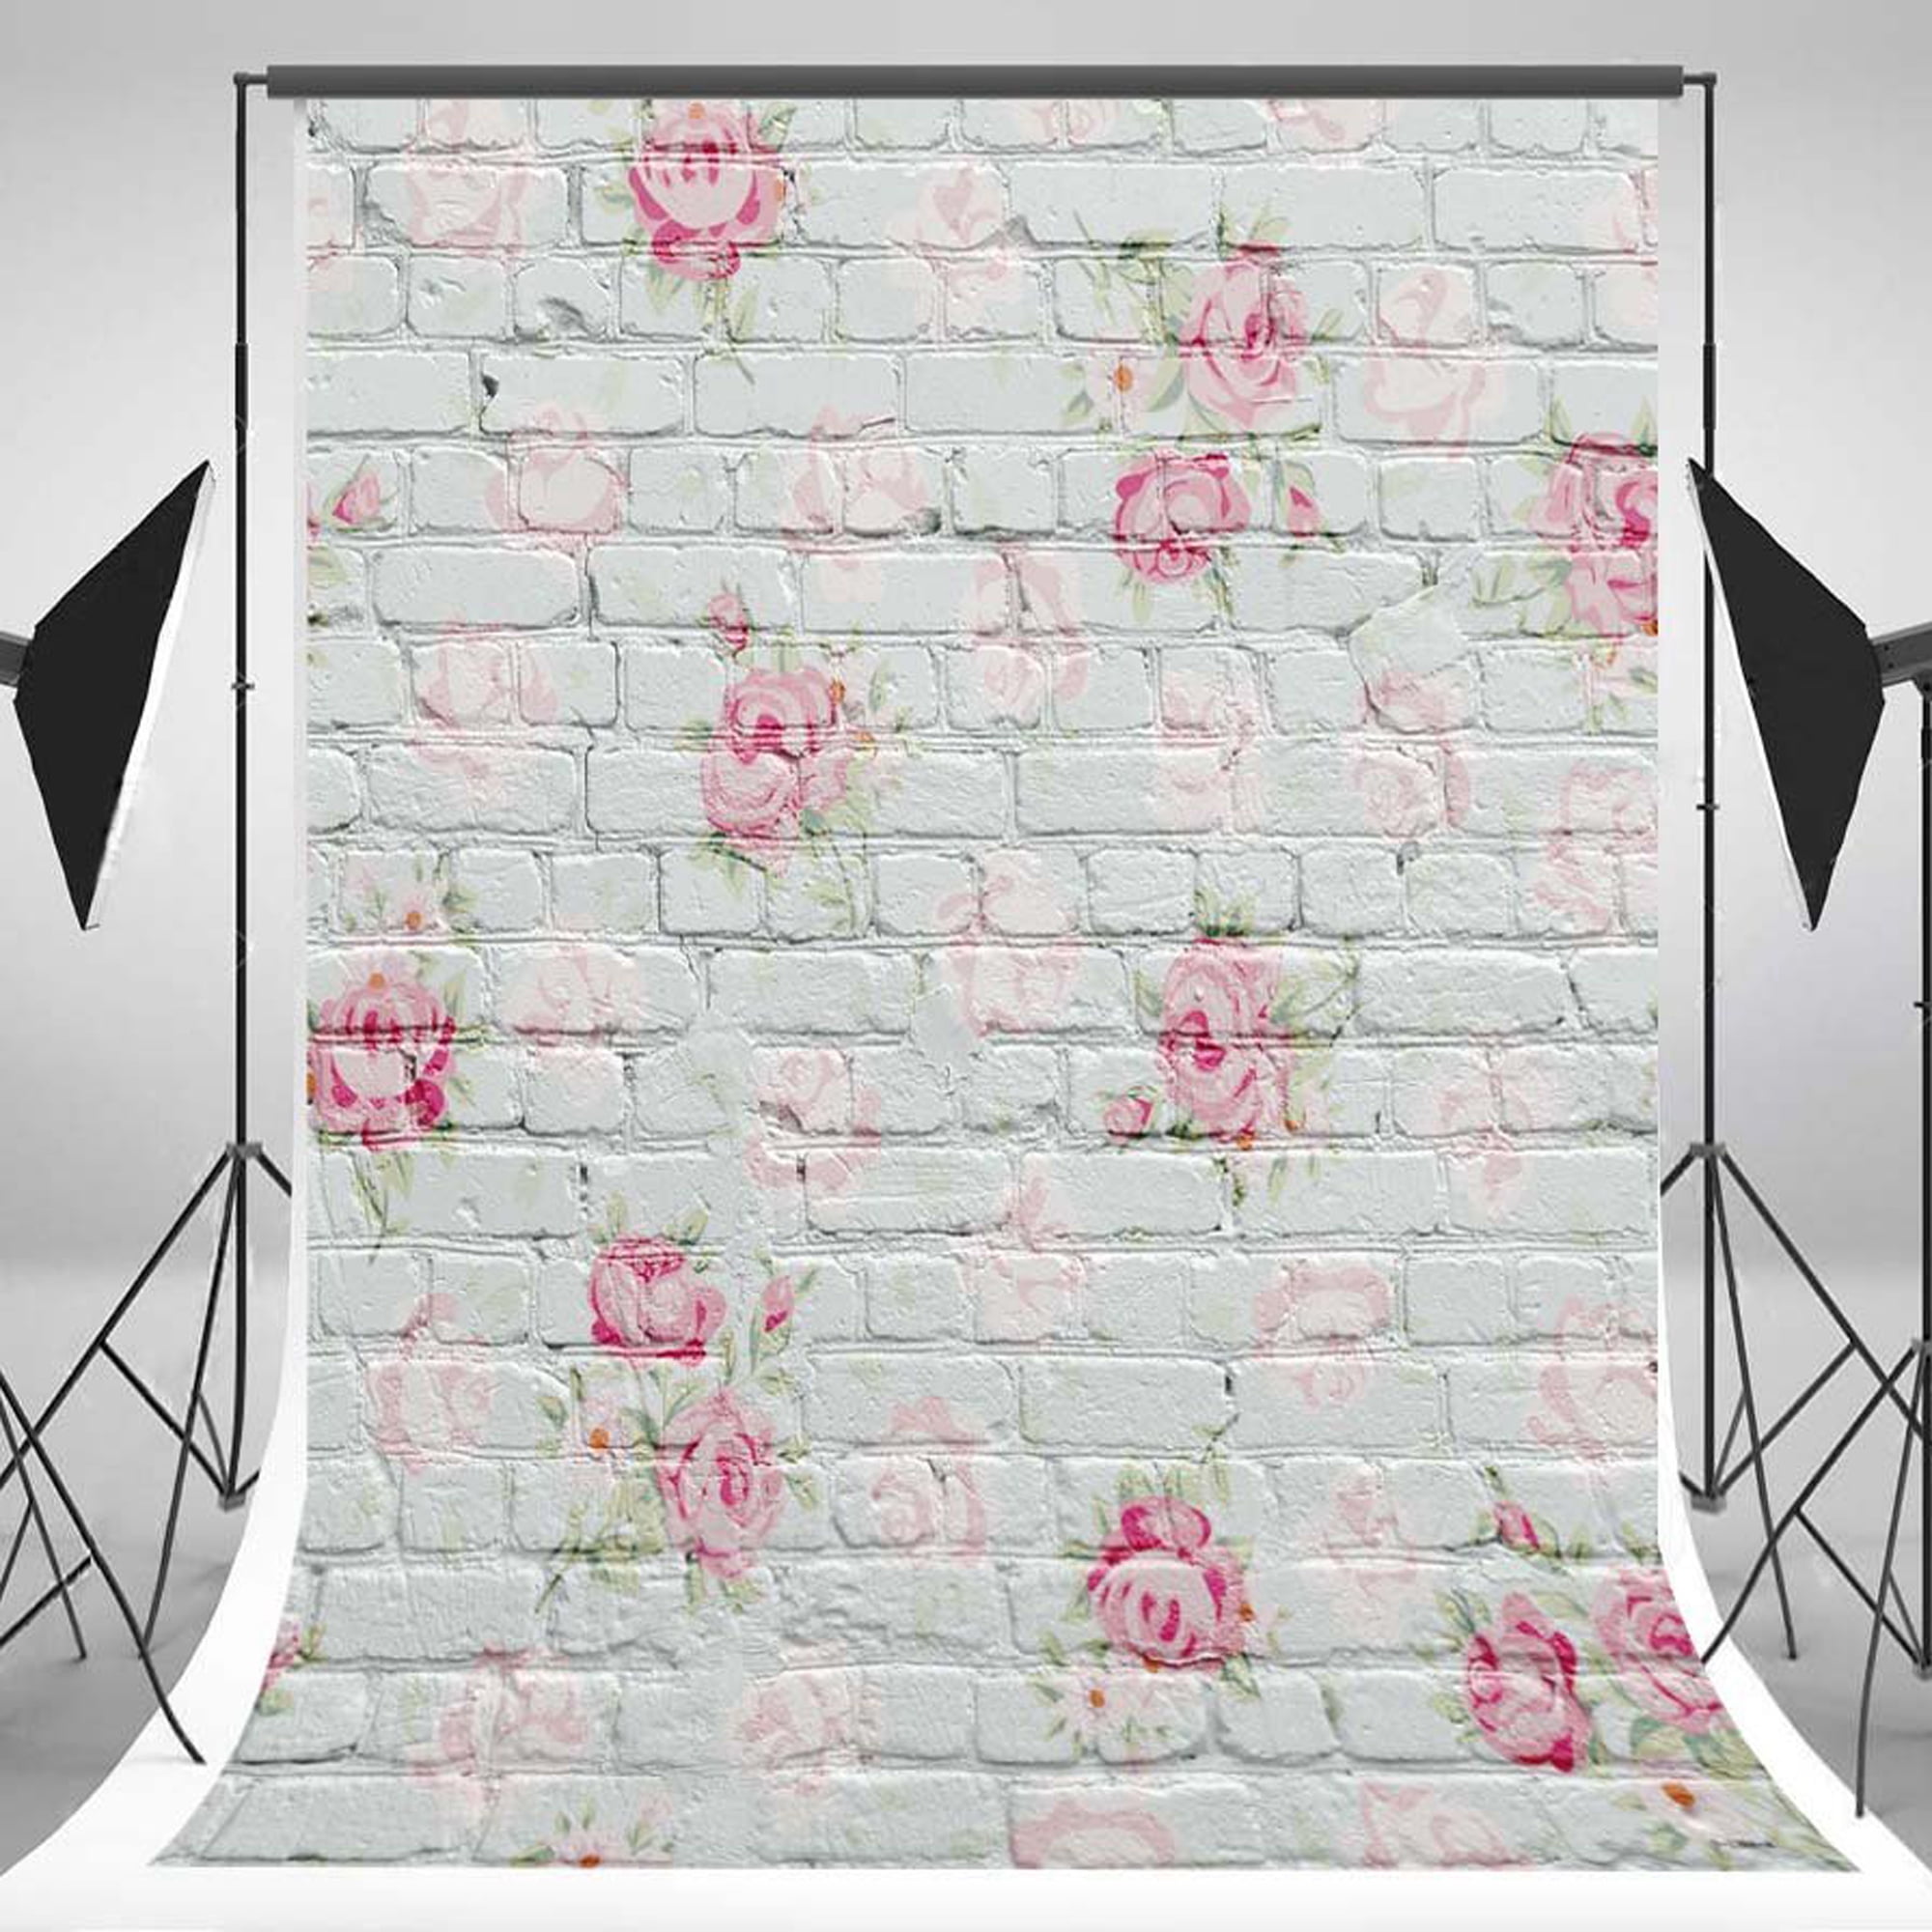 5x7ft Vinyl White Brick Wall Gray Road Party Decorations Photo Backdrop Seamless Folding and Washable No Wrinkle Photography Studio Background